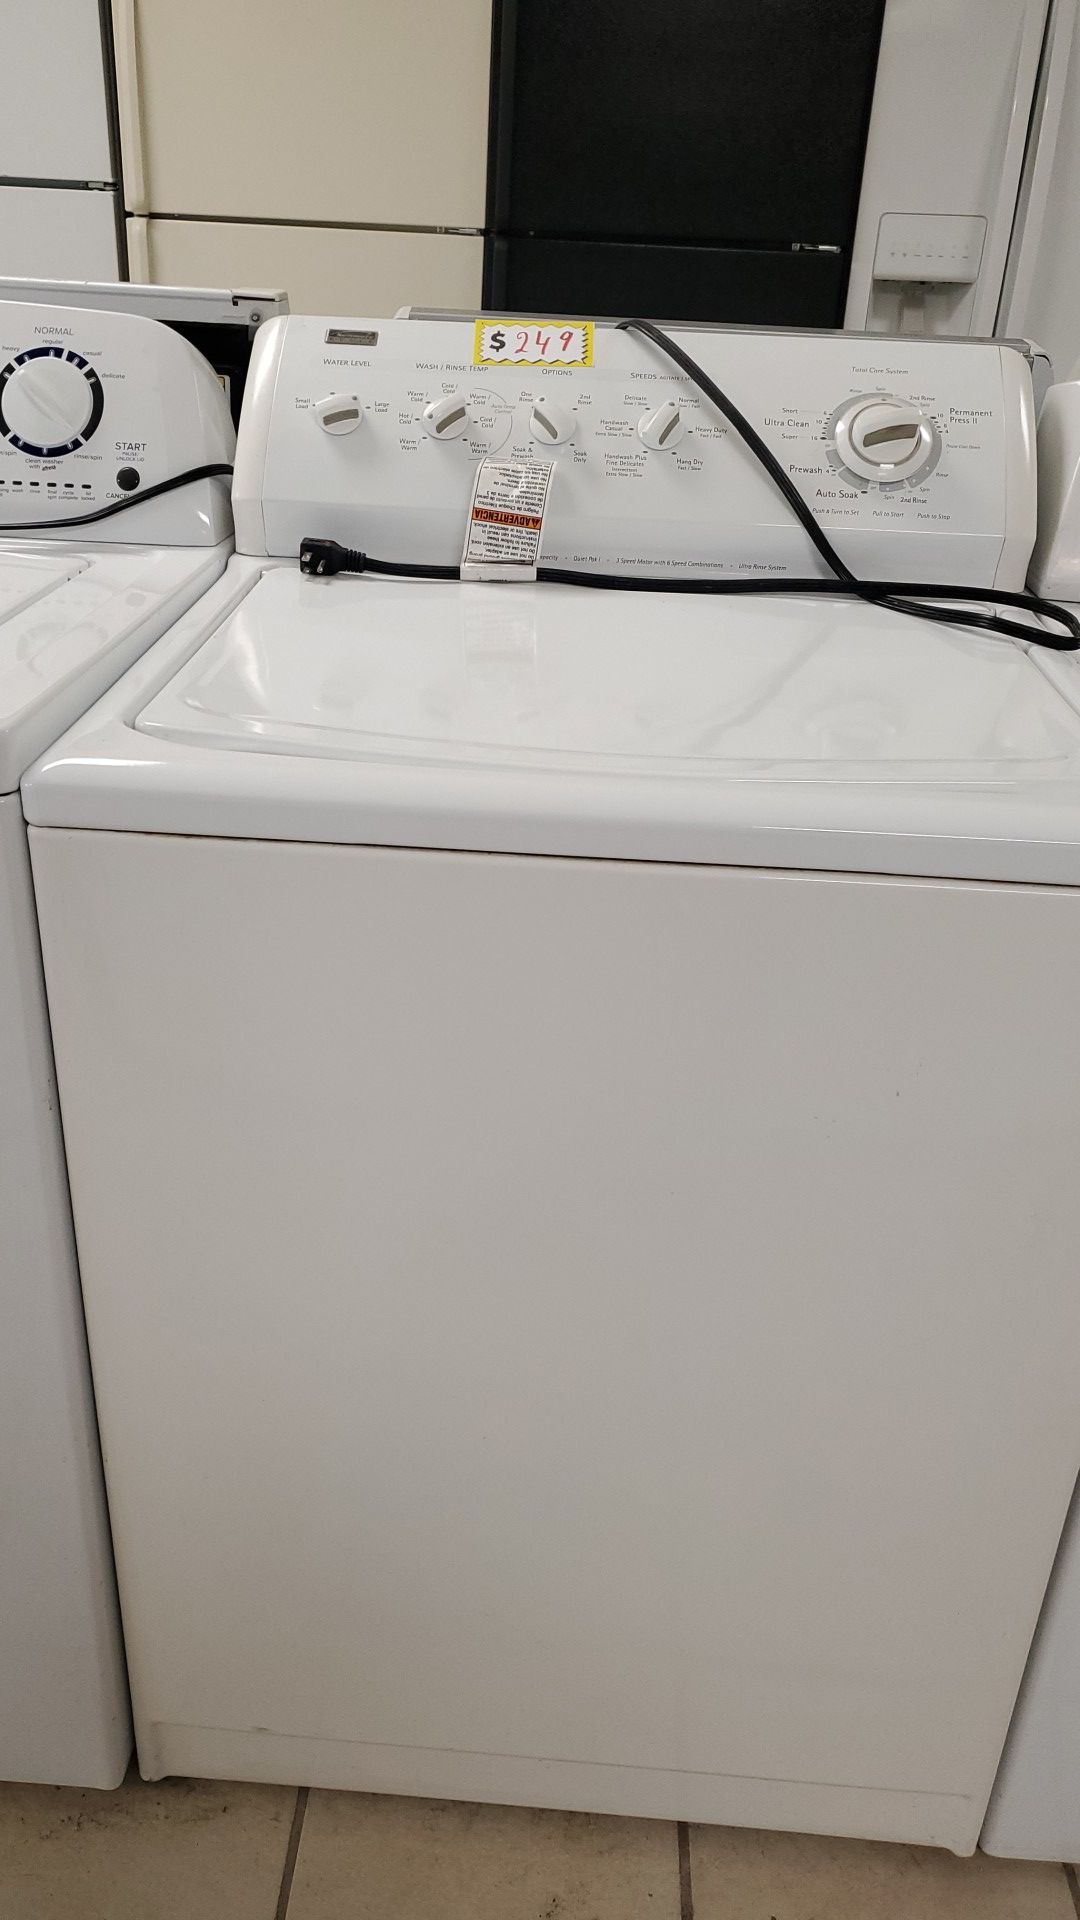 Kenmore 5.4cu.ft top loading washer